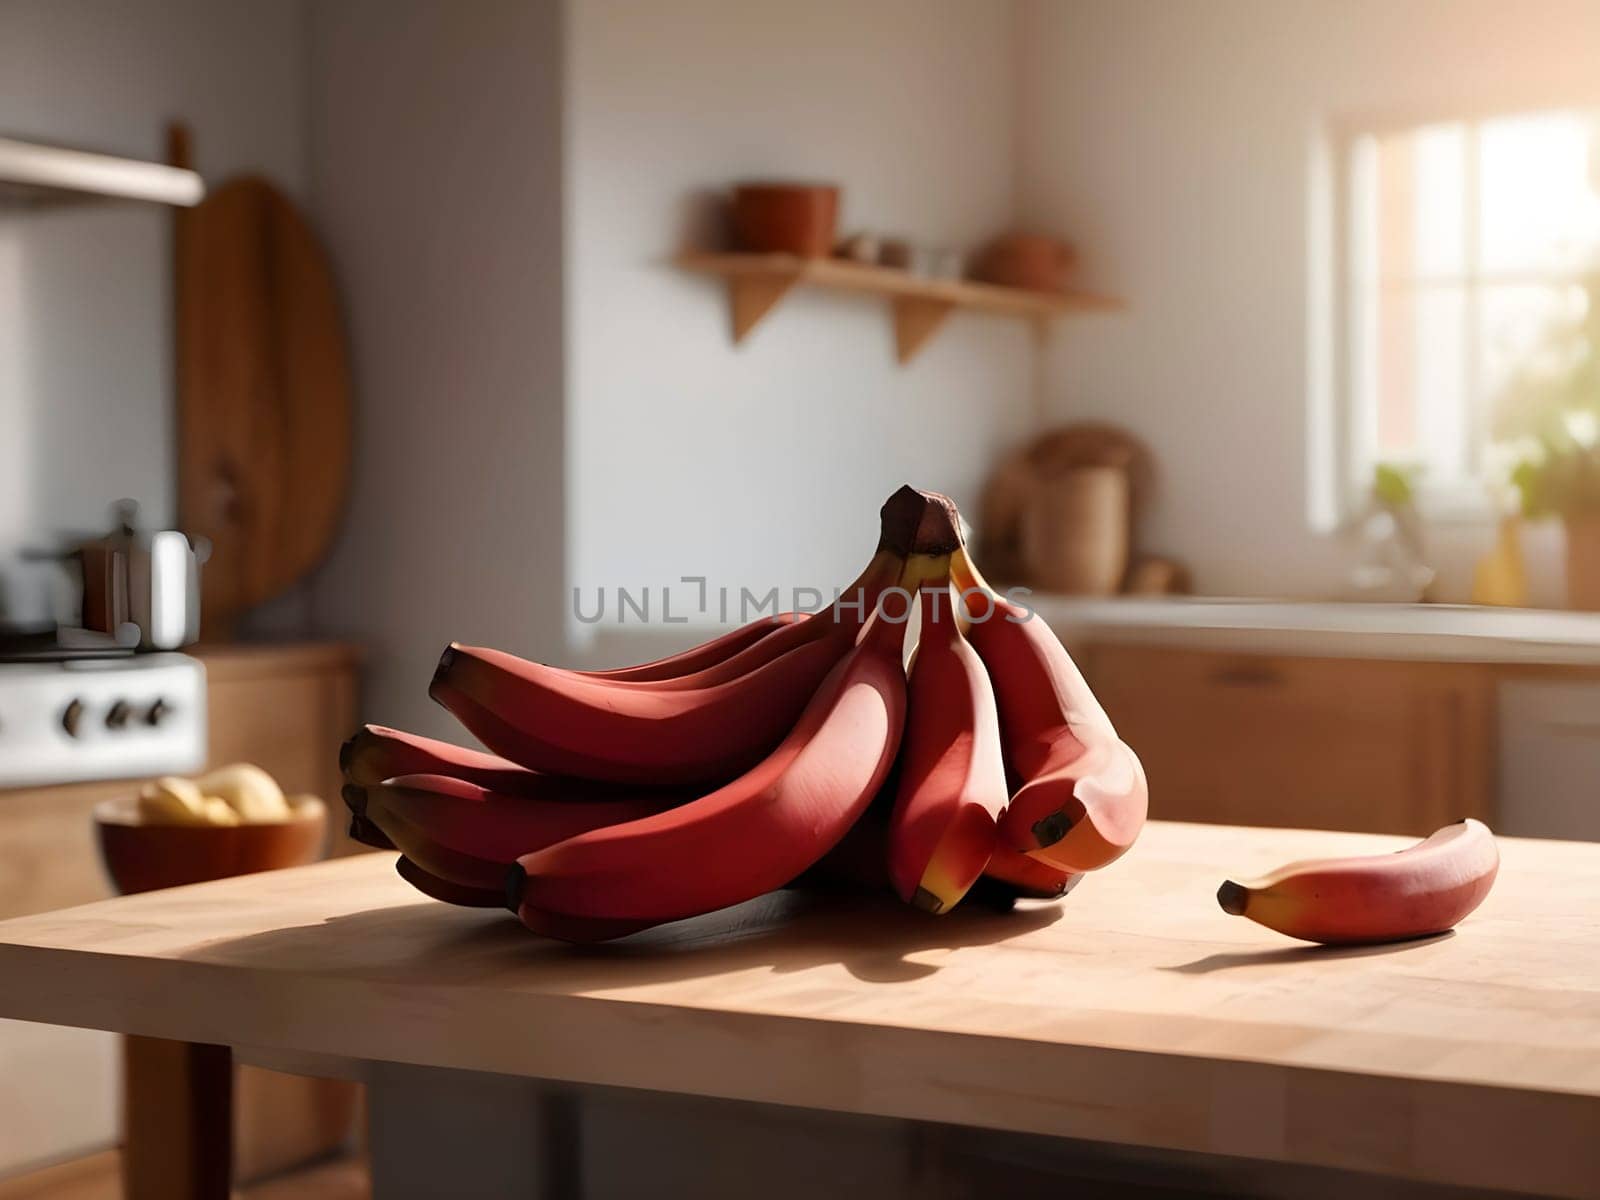 Kitchen Elegance: Red Bananas Glistening on a Wooden Cutting Board by mailos